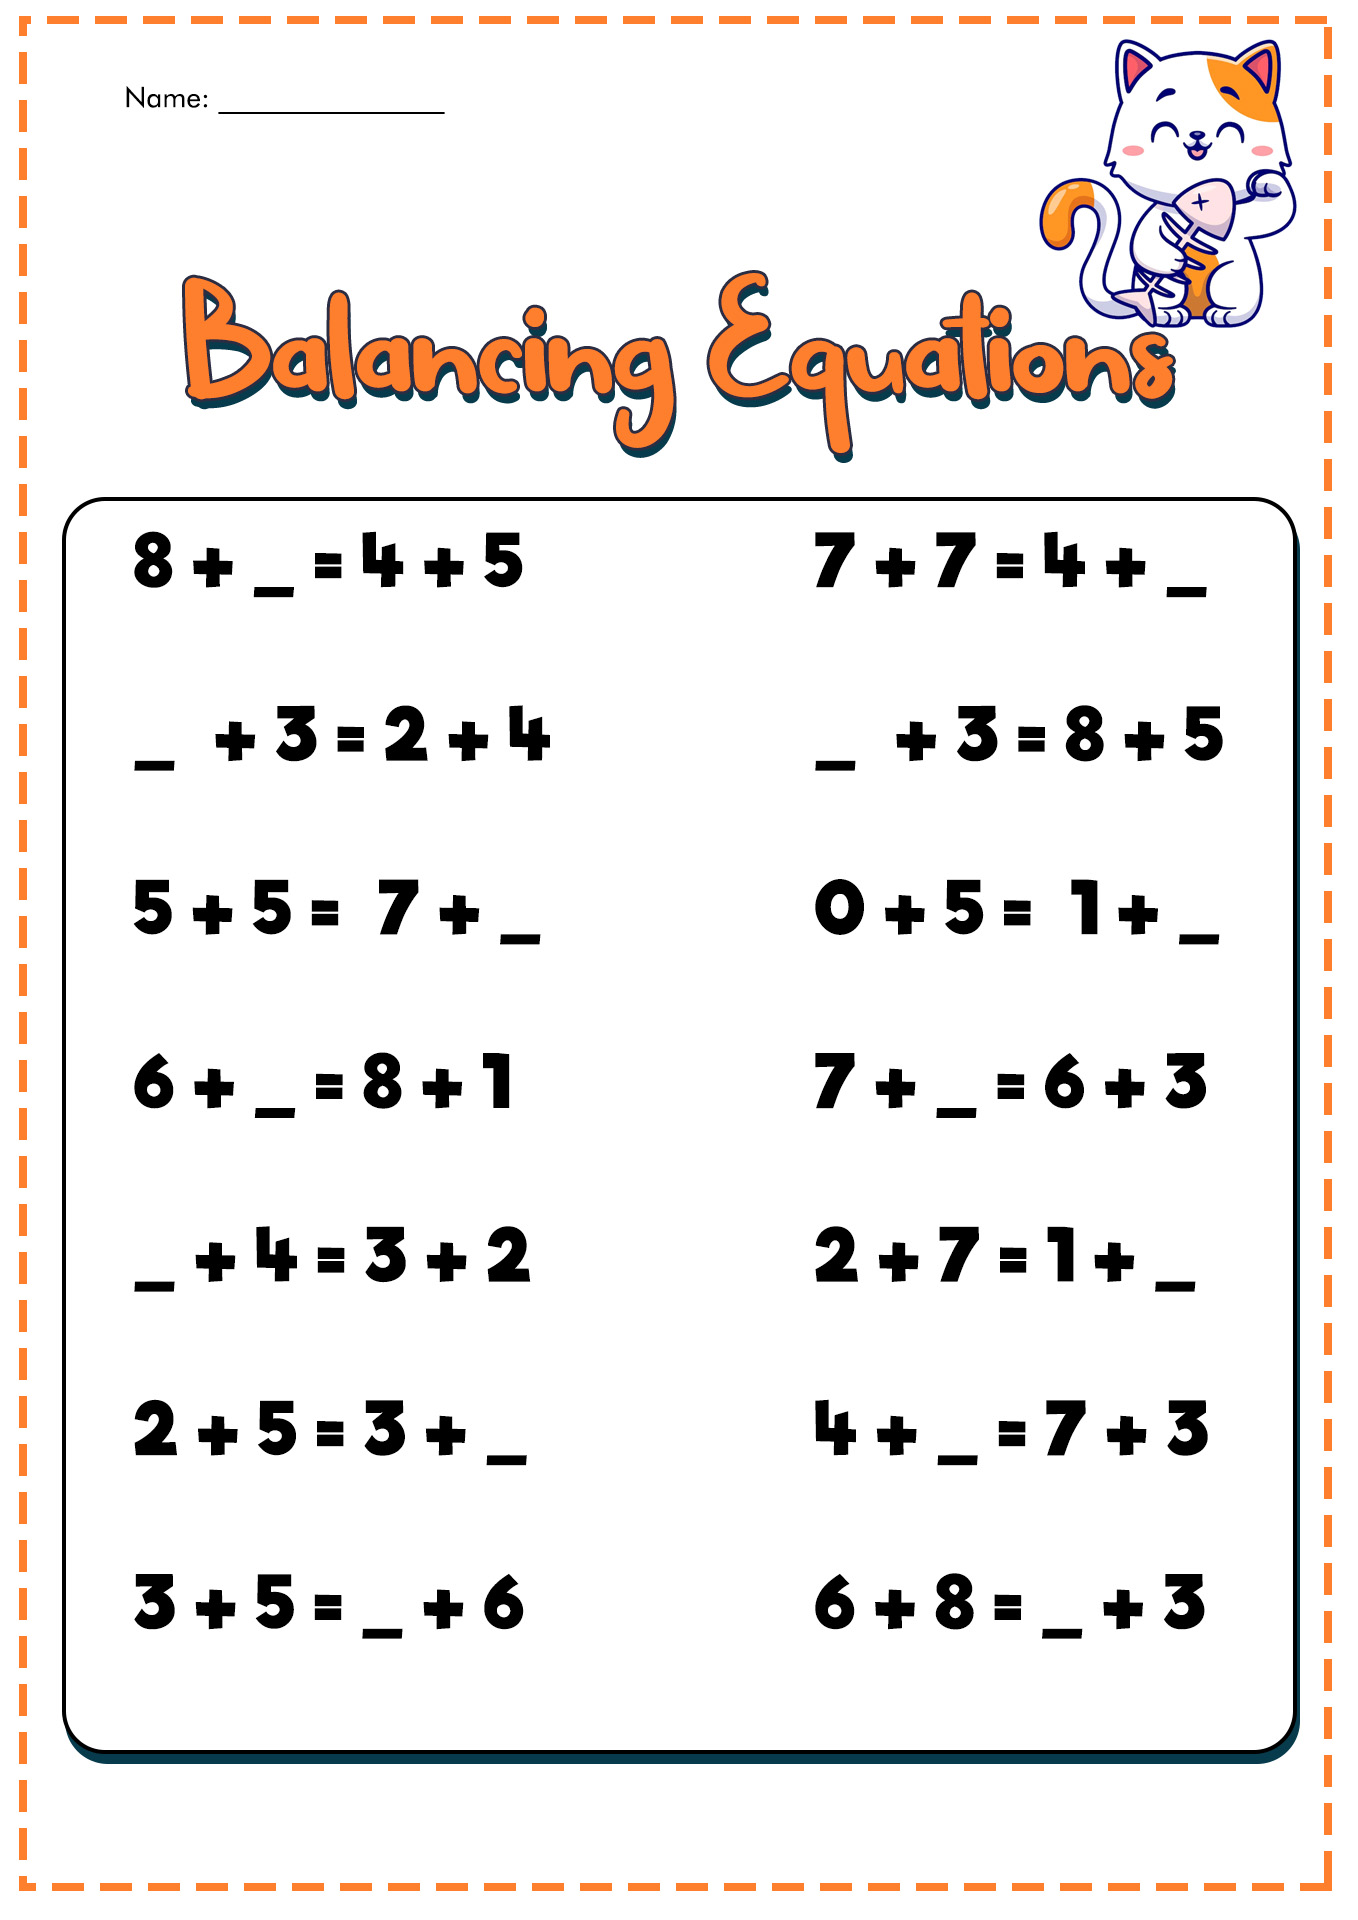 math-equations-worksheets-4th-grade-exploring-algebra-what-s-the-rule-gr-4-printable-4th-grade